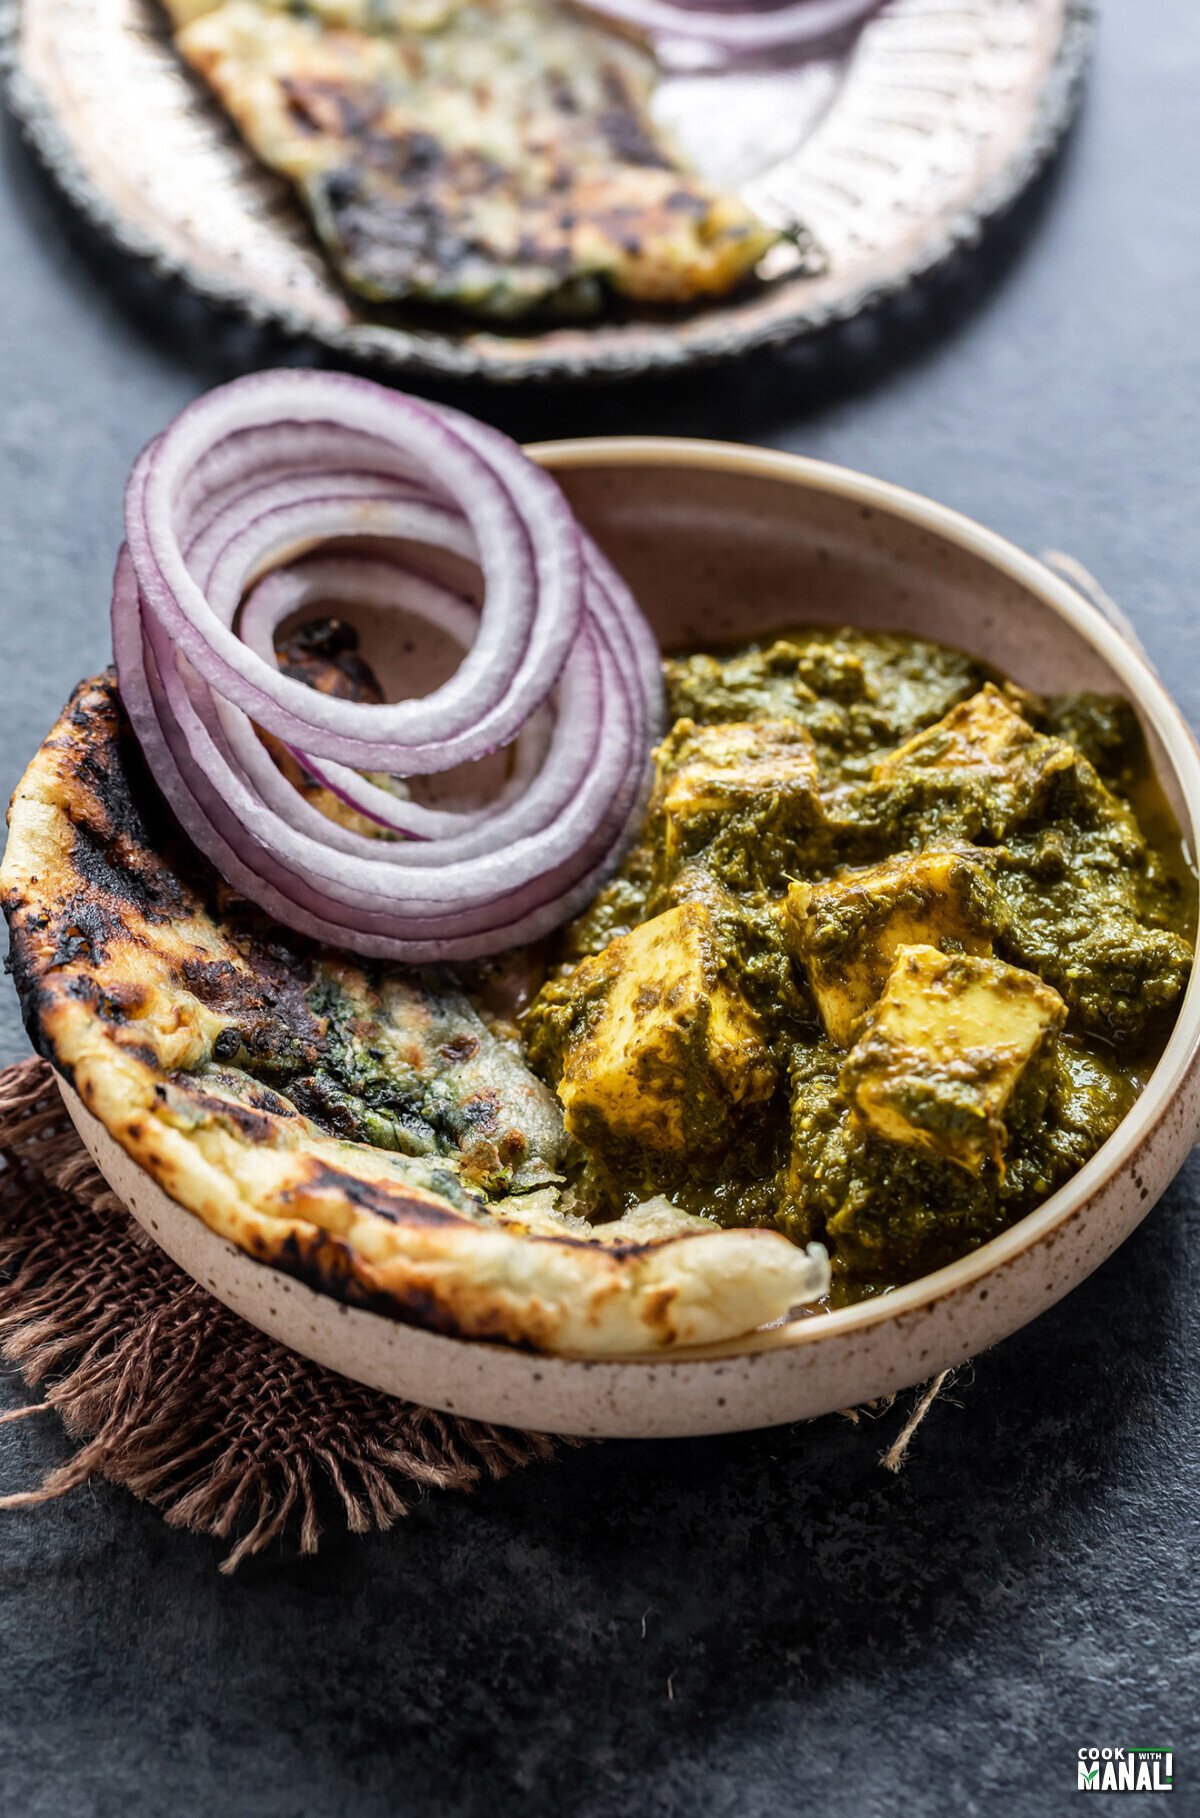 saag paneer served with a side of naan and onion slices in a round bowl